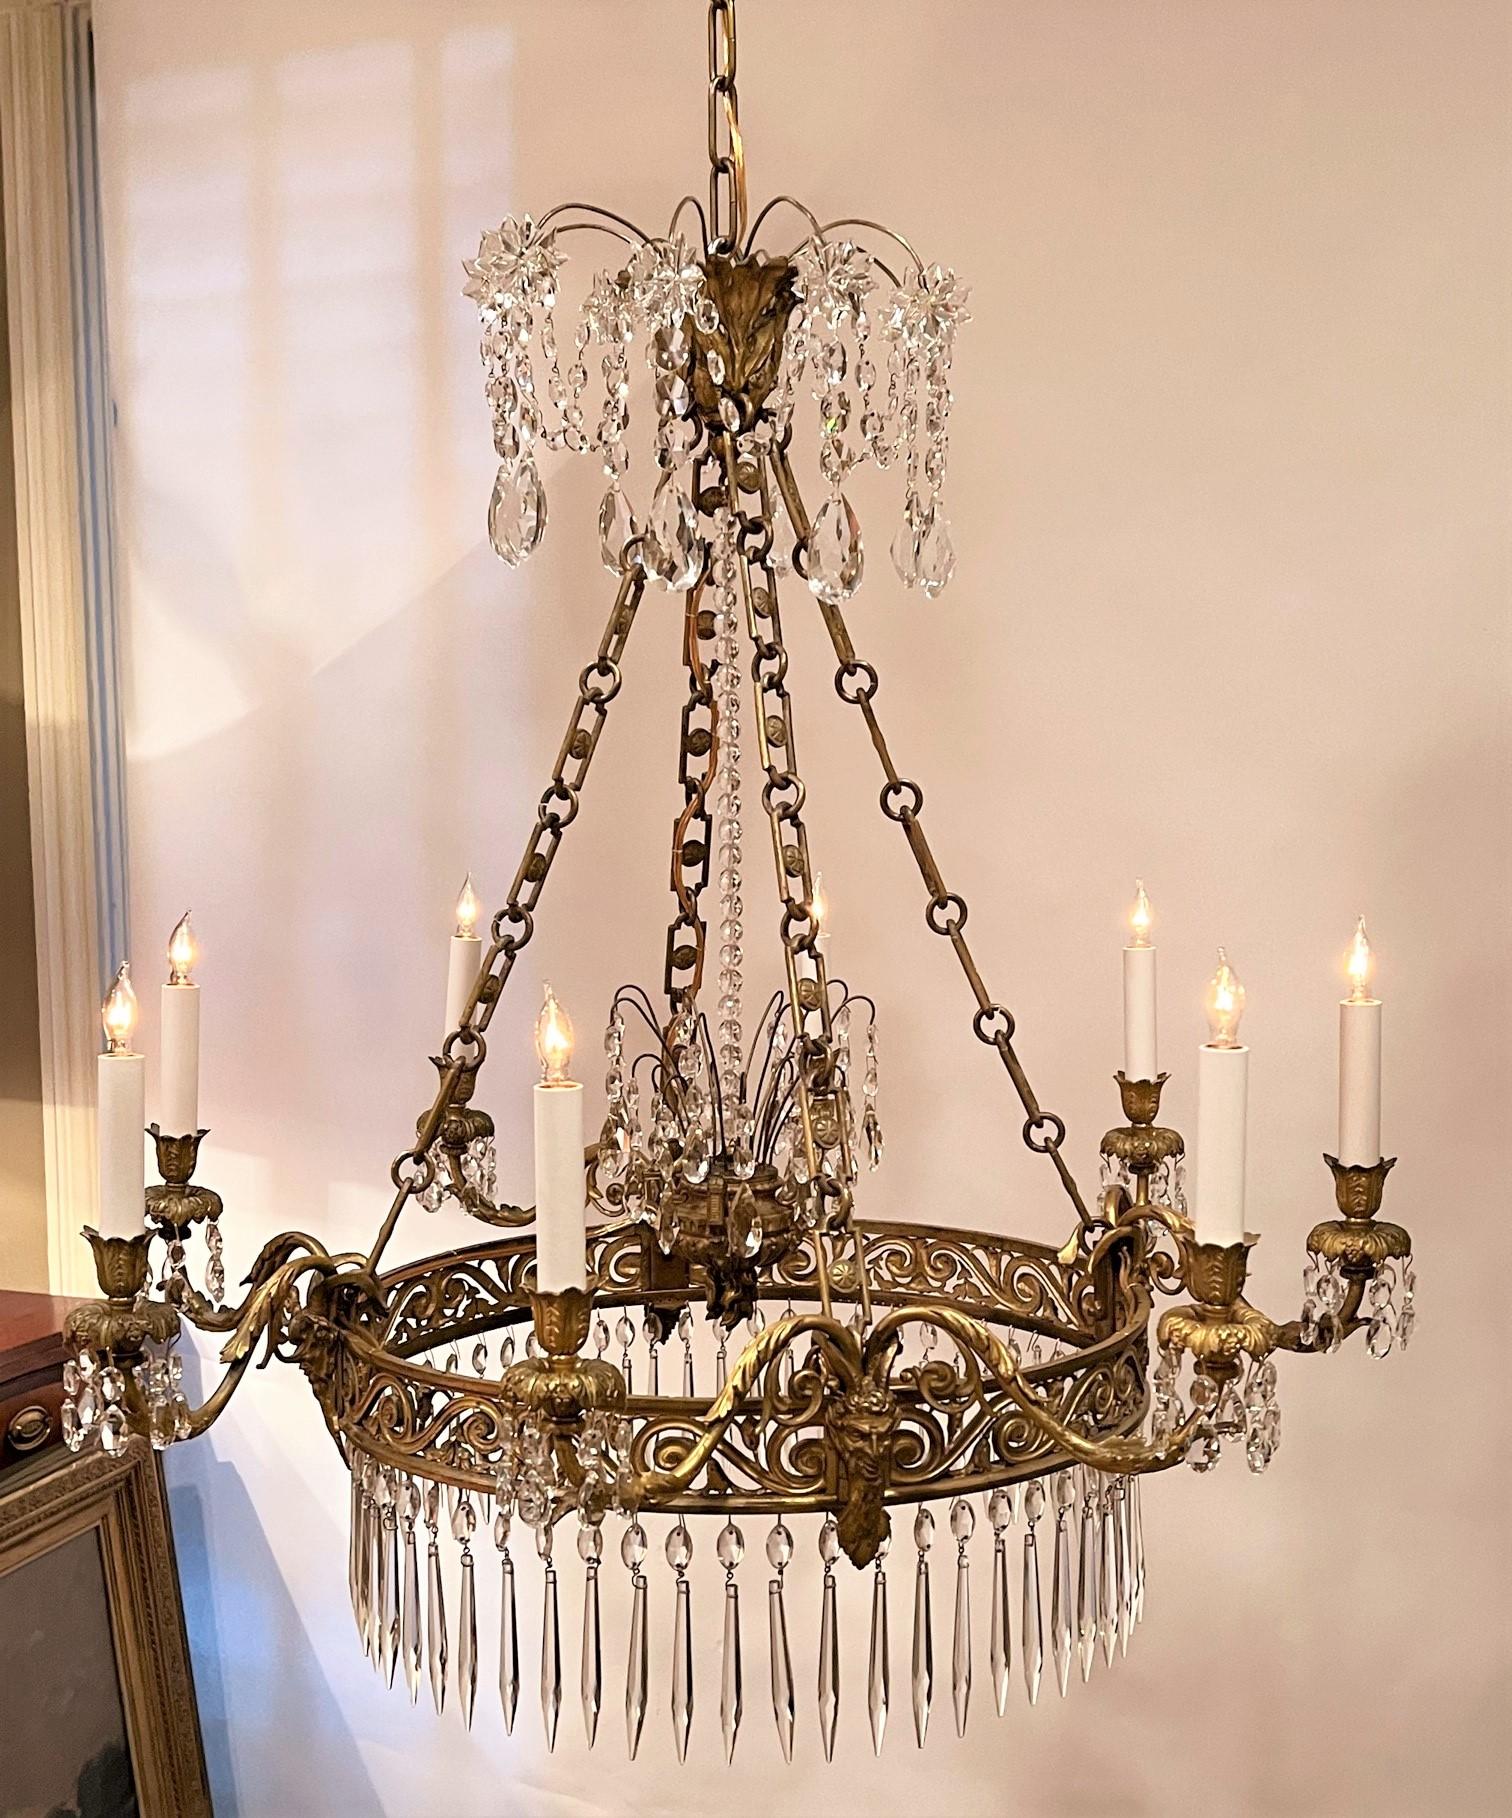 Neo-Classic 8-Light Gilt Bronze & Crystal Chandelier, France, Circa:1830 For Sale 6